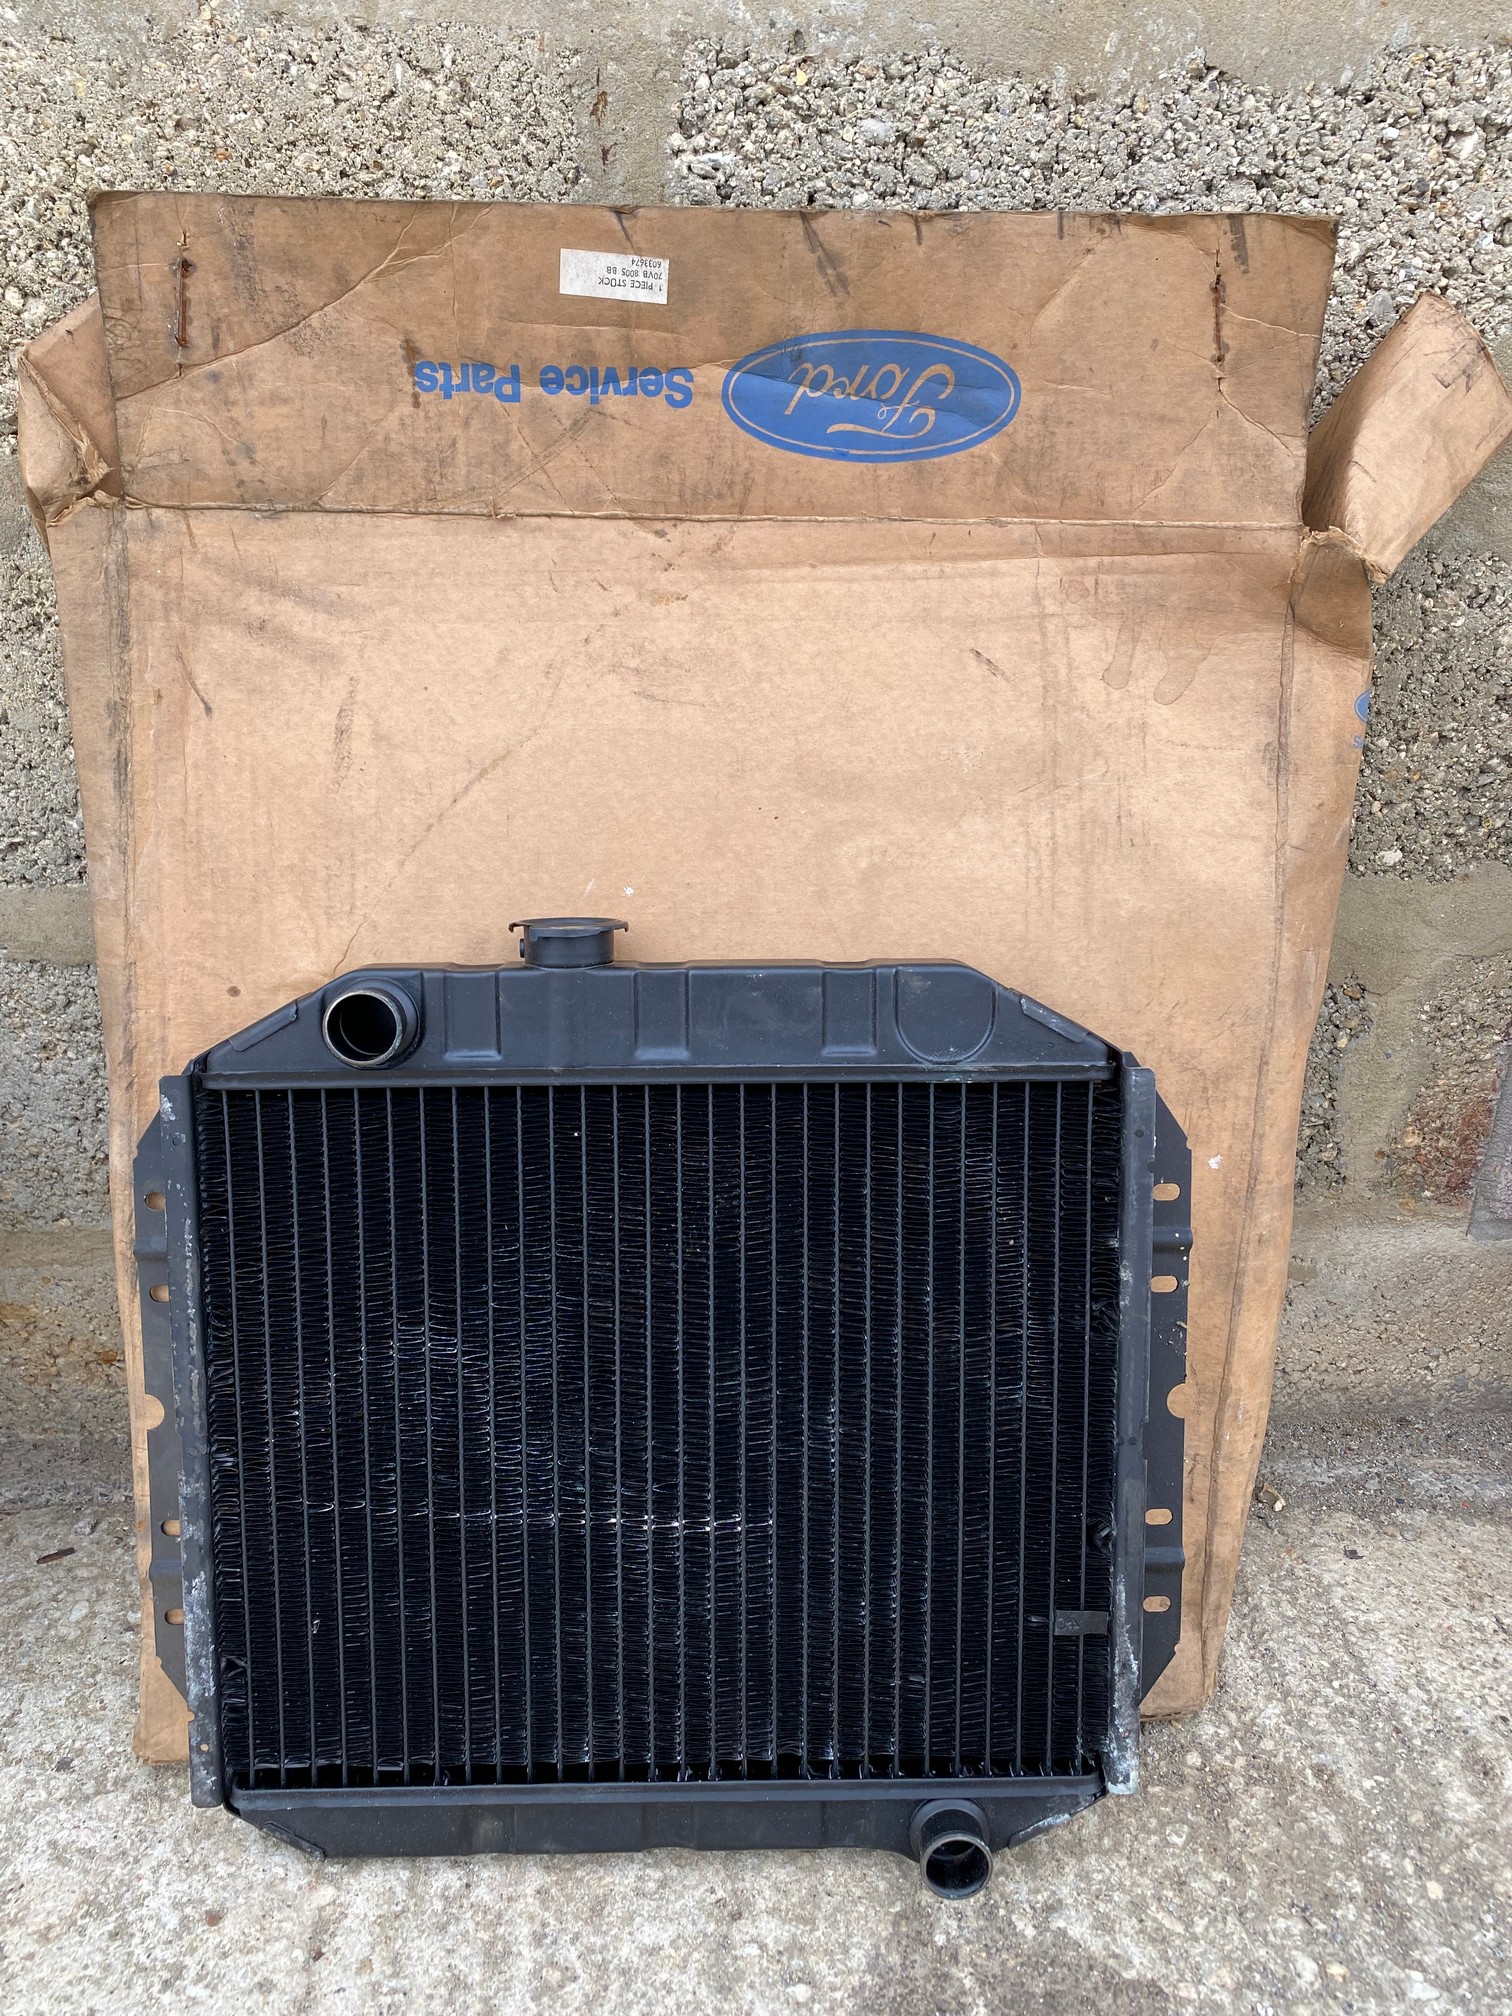 A new old stock Ford Escort radiator in original packaging.